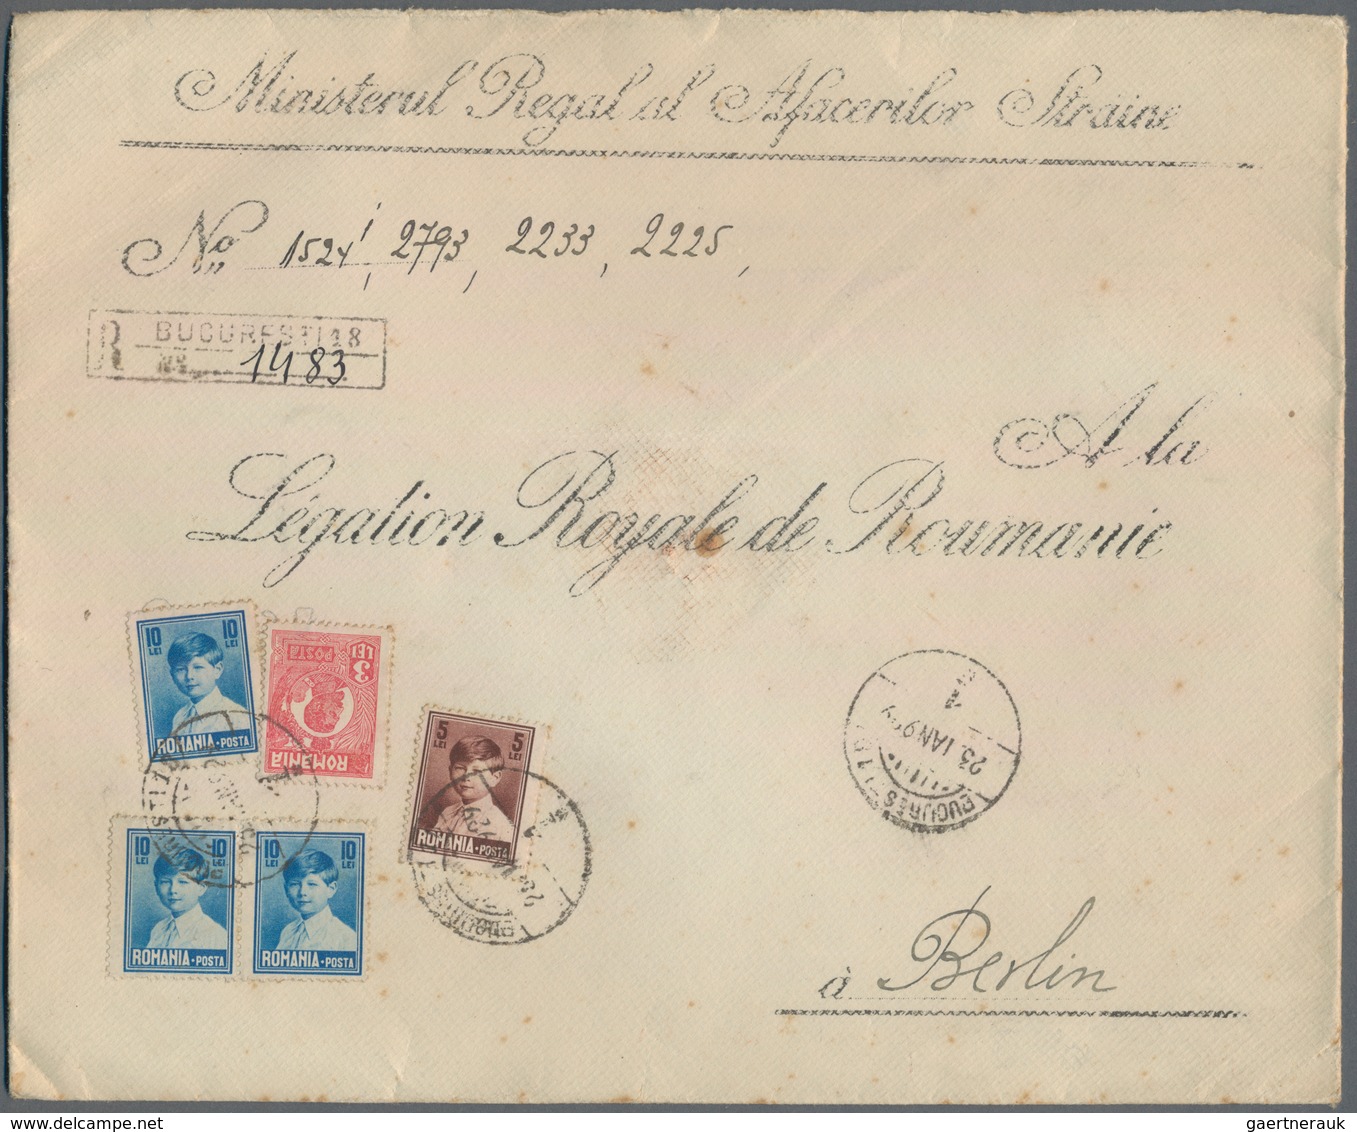 Rumänien: 1889/1944, holding of apprx. 440 commercial covers/cards, showing a vast range of interest